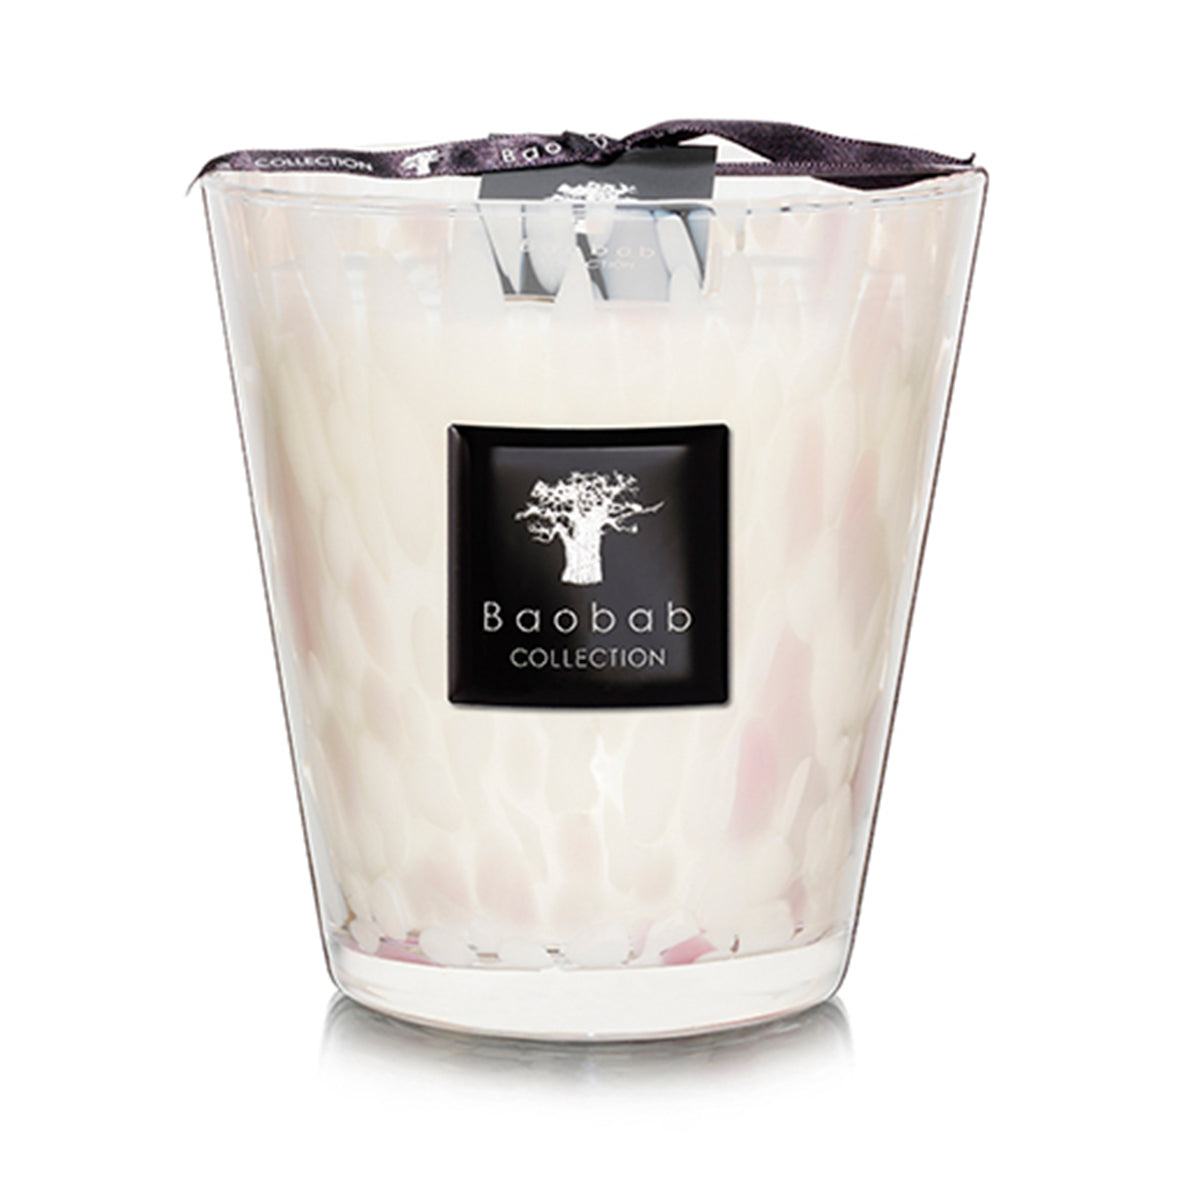 BAOBAB COLLECTION White Pearls Candle